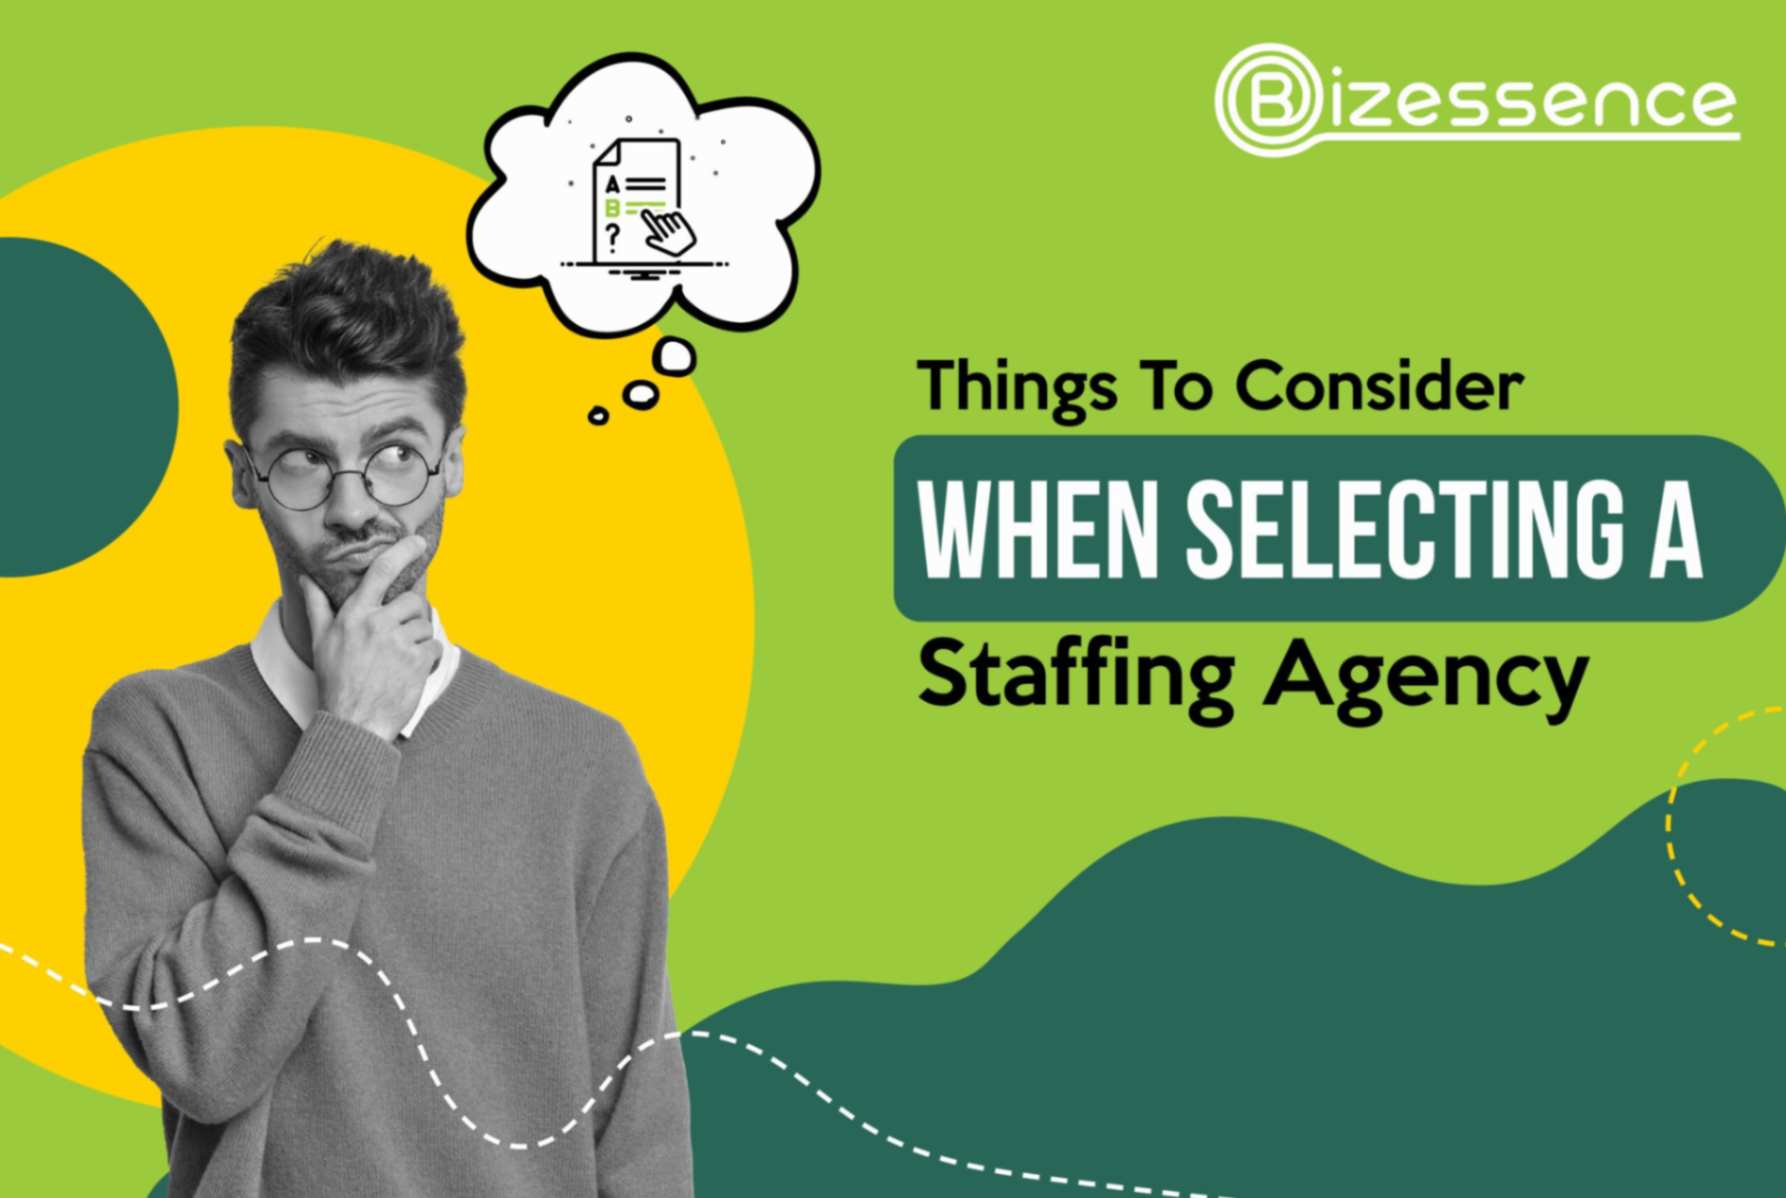 Things To Consider When Selecting a Staffing Agency!